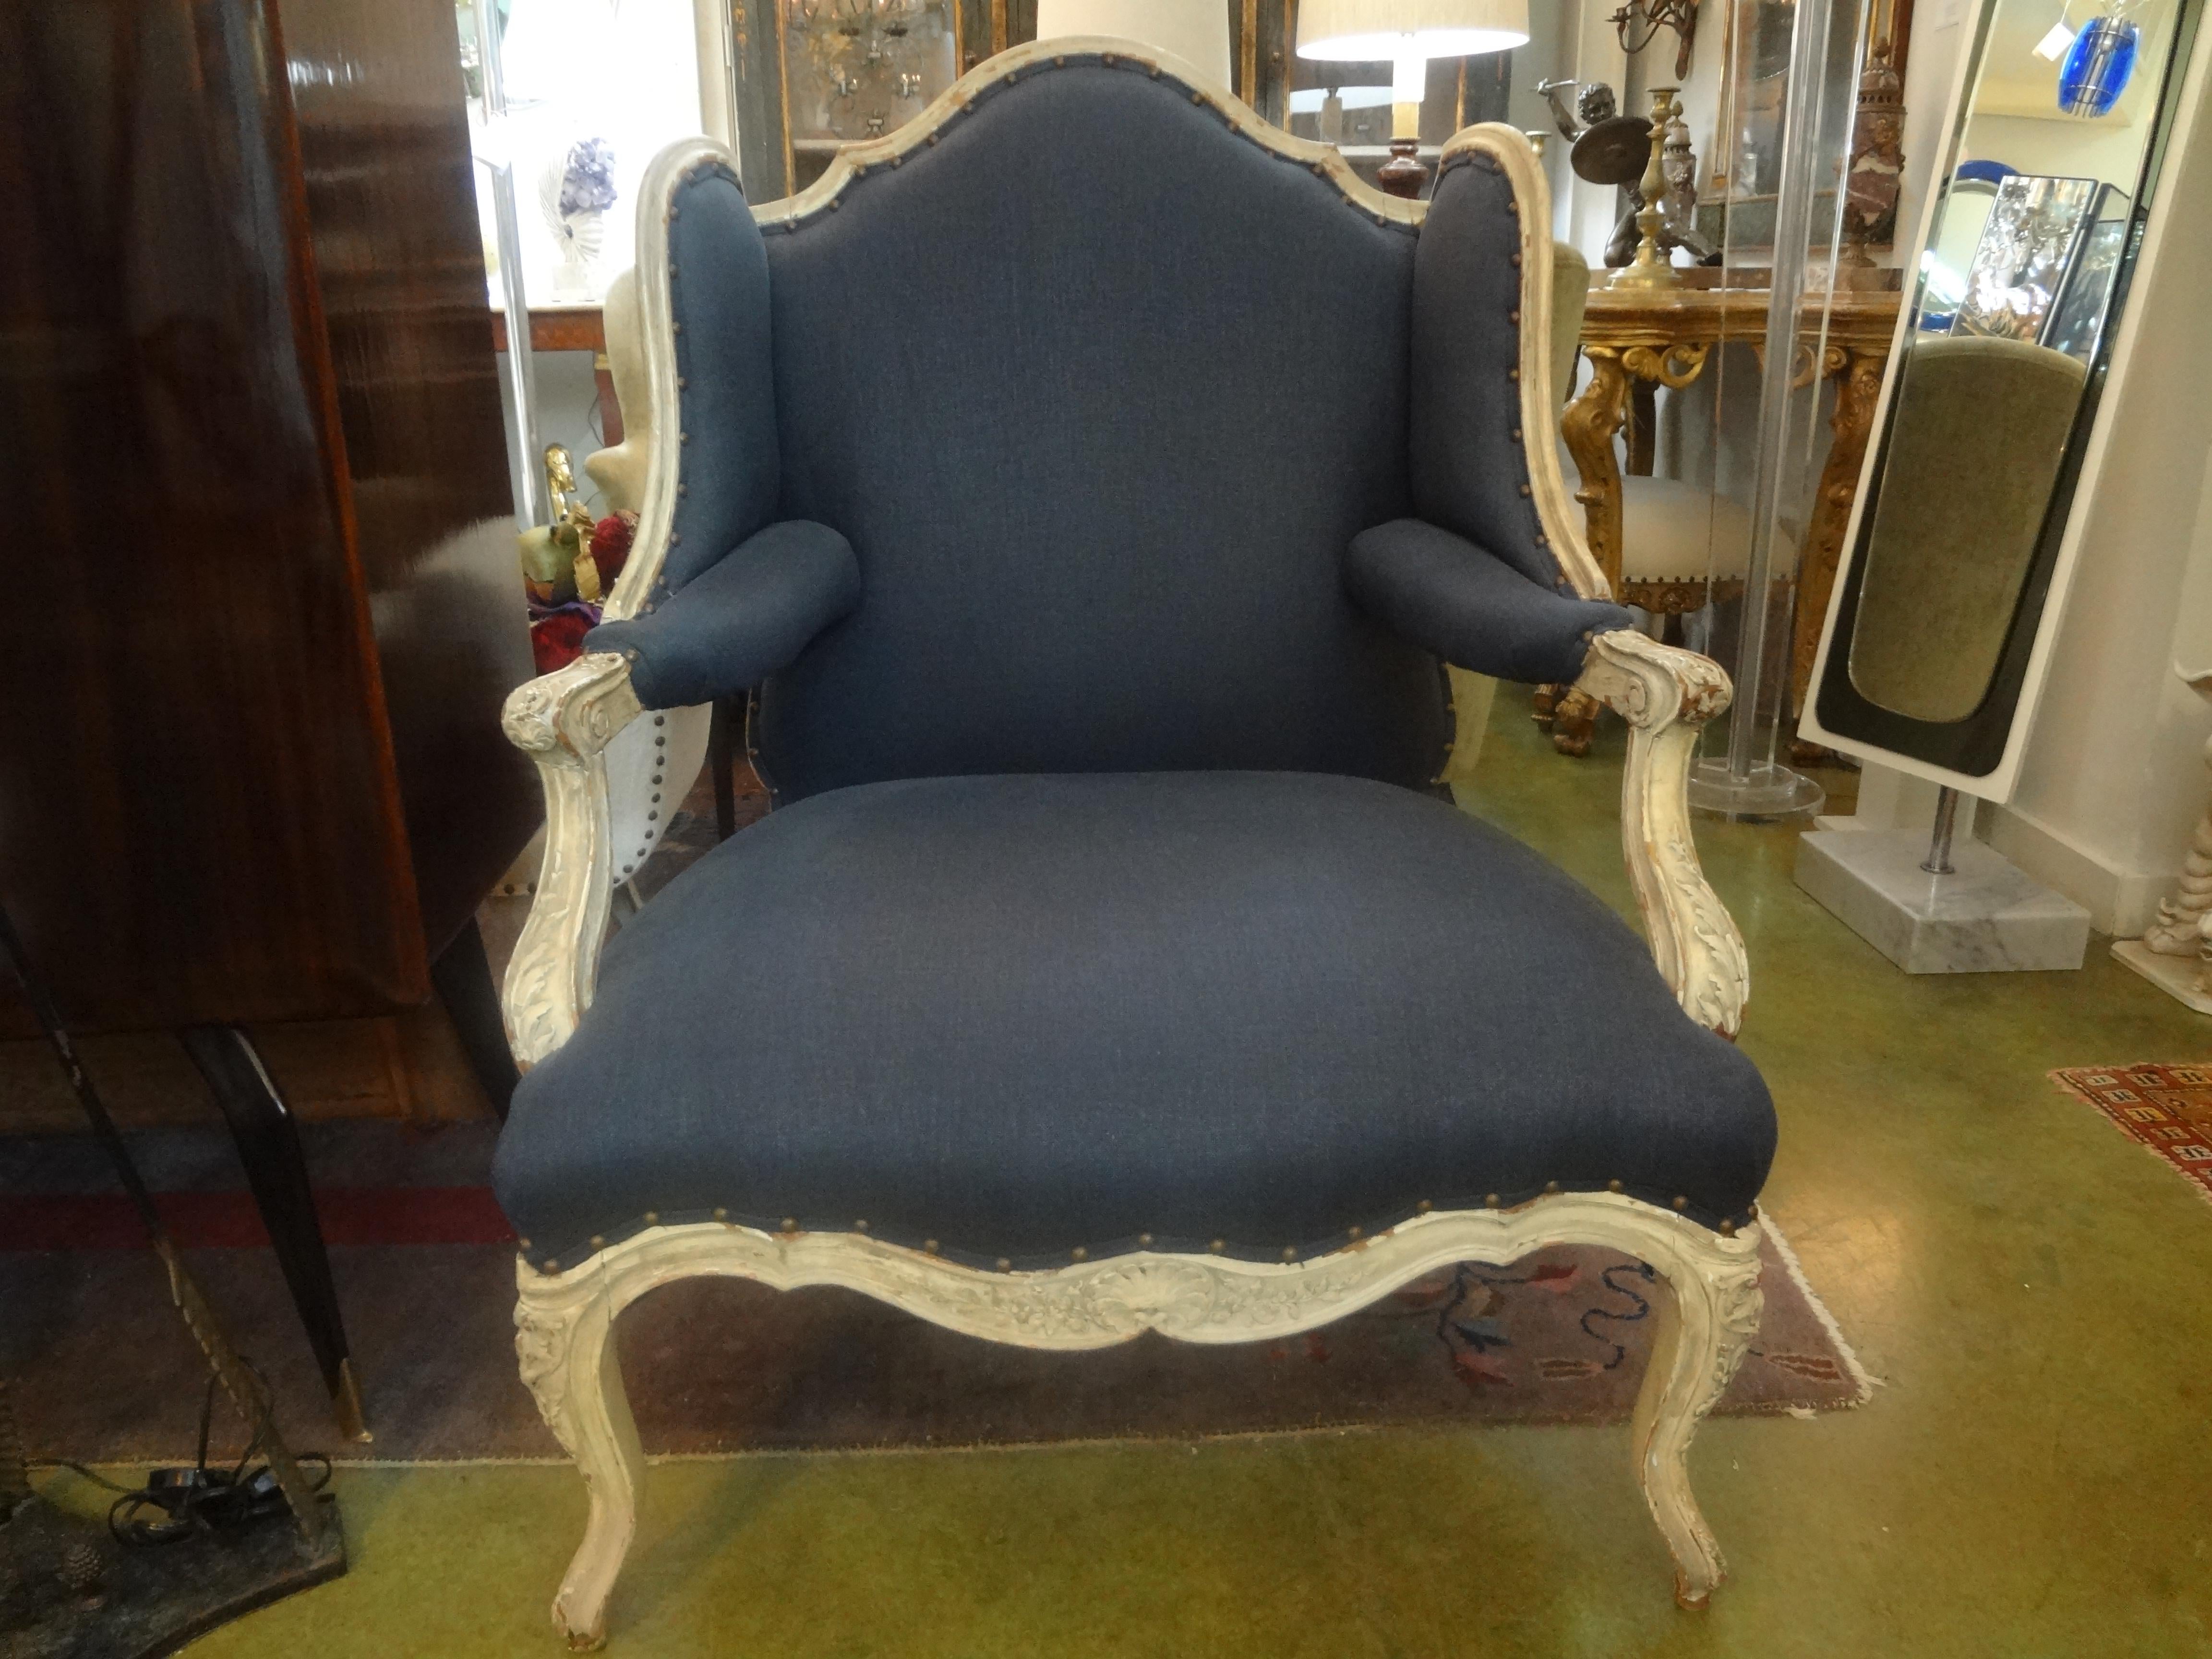 Stunning 19th century French Régence style fauteuil. This beautiful and comfortable antique painted French Regence style or Louis XVI style armchair, bergere, marquise or wingback chair has been taken down to the frame and professionally upholstered